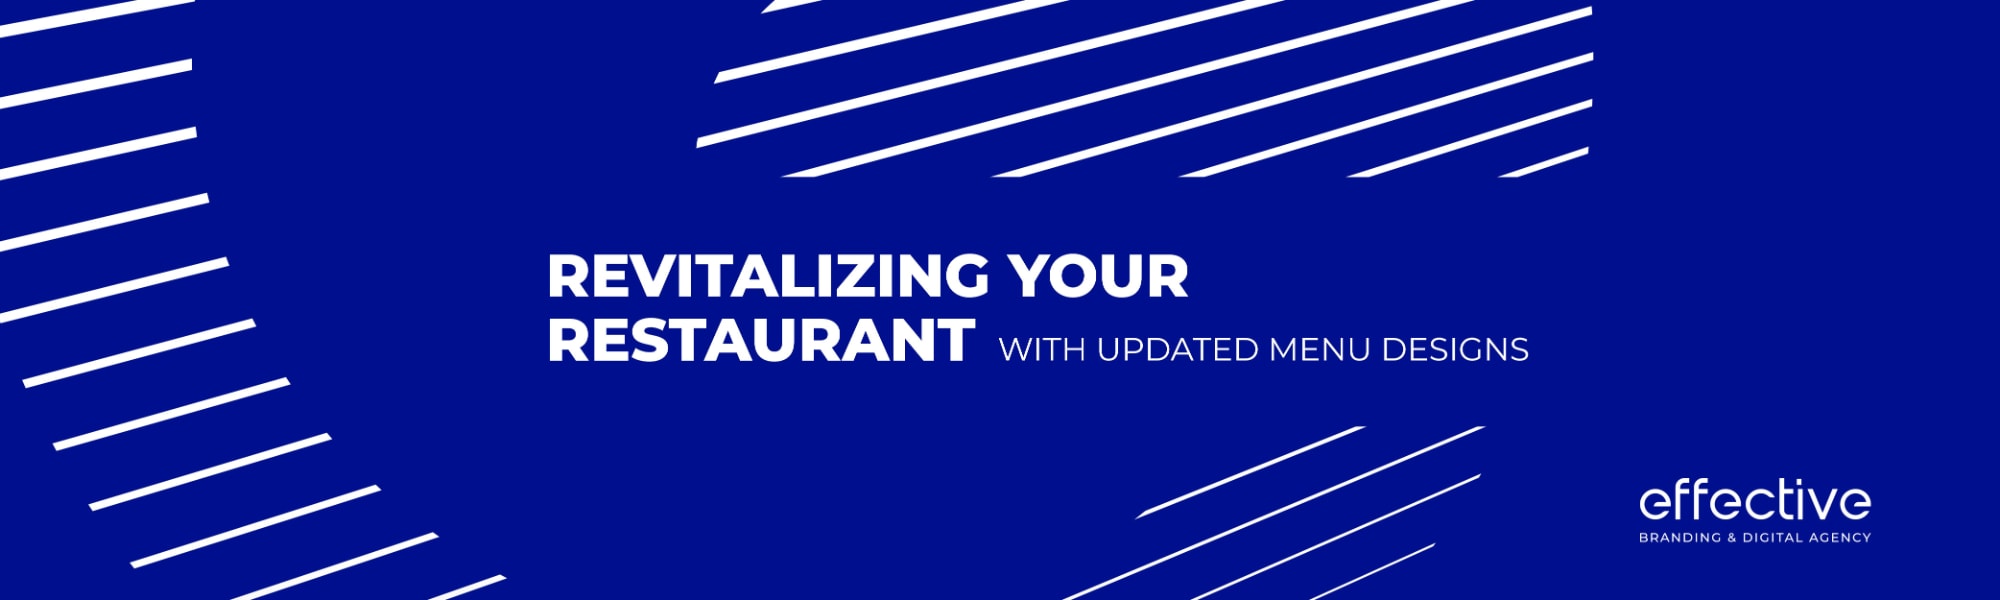 Revitalizing Your Restaurant with Updated Menu Designs